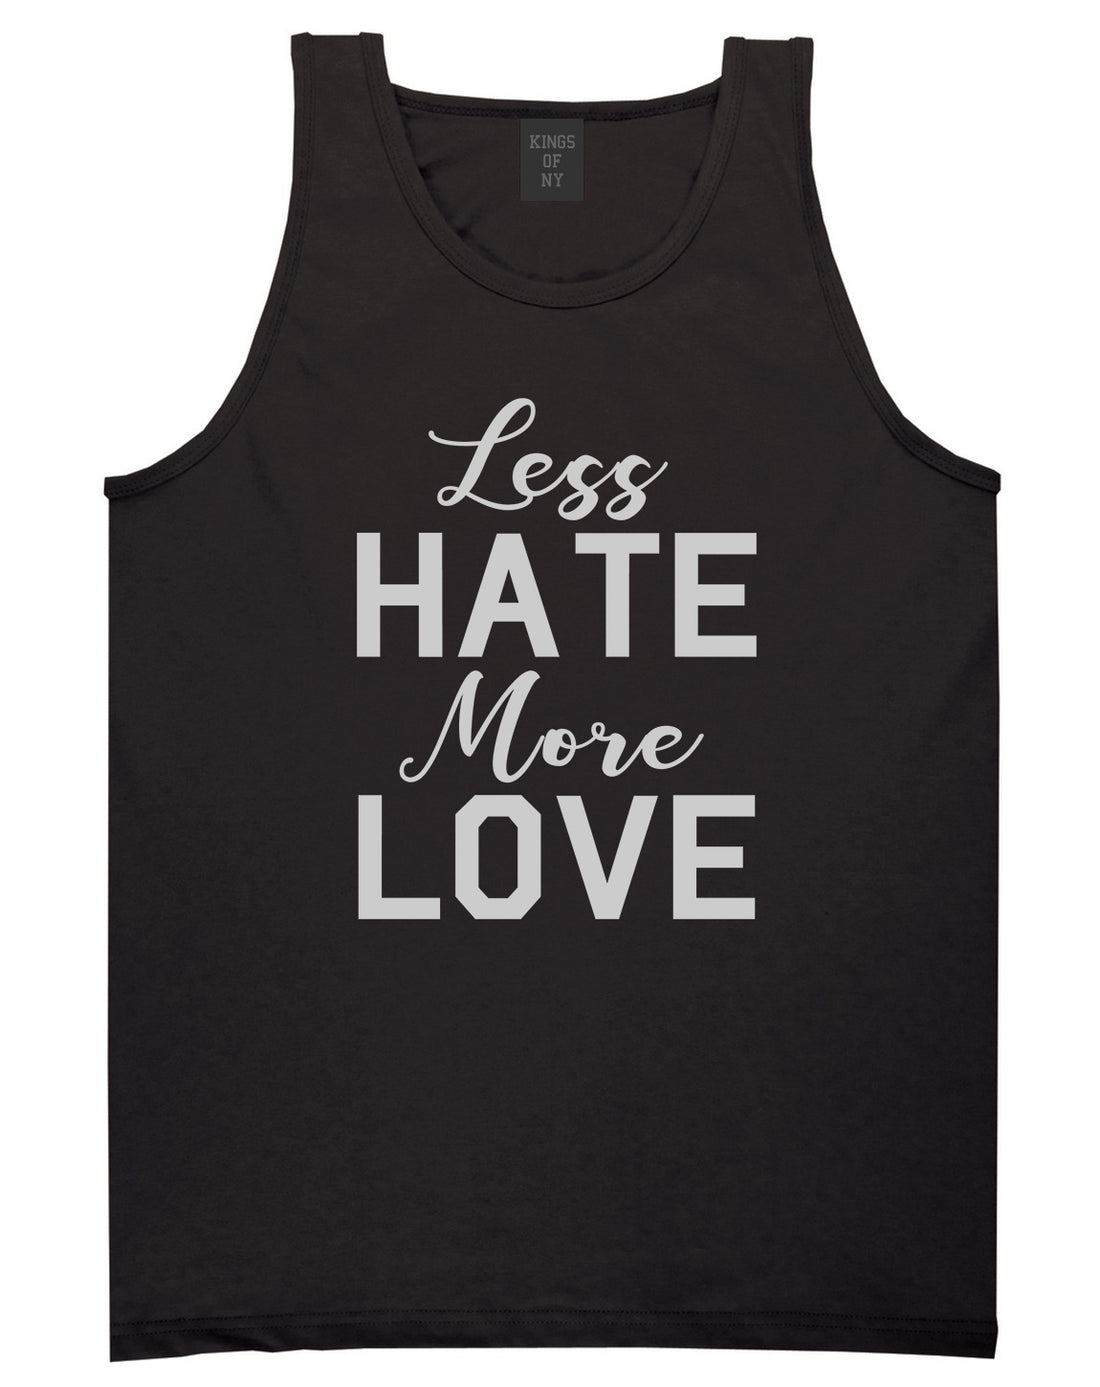 Less Hate More Love Mens Tank Top Shirt Black by Kings Of NY